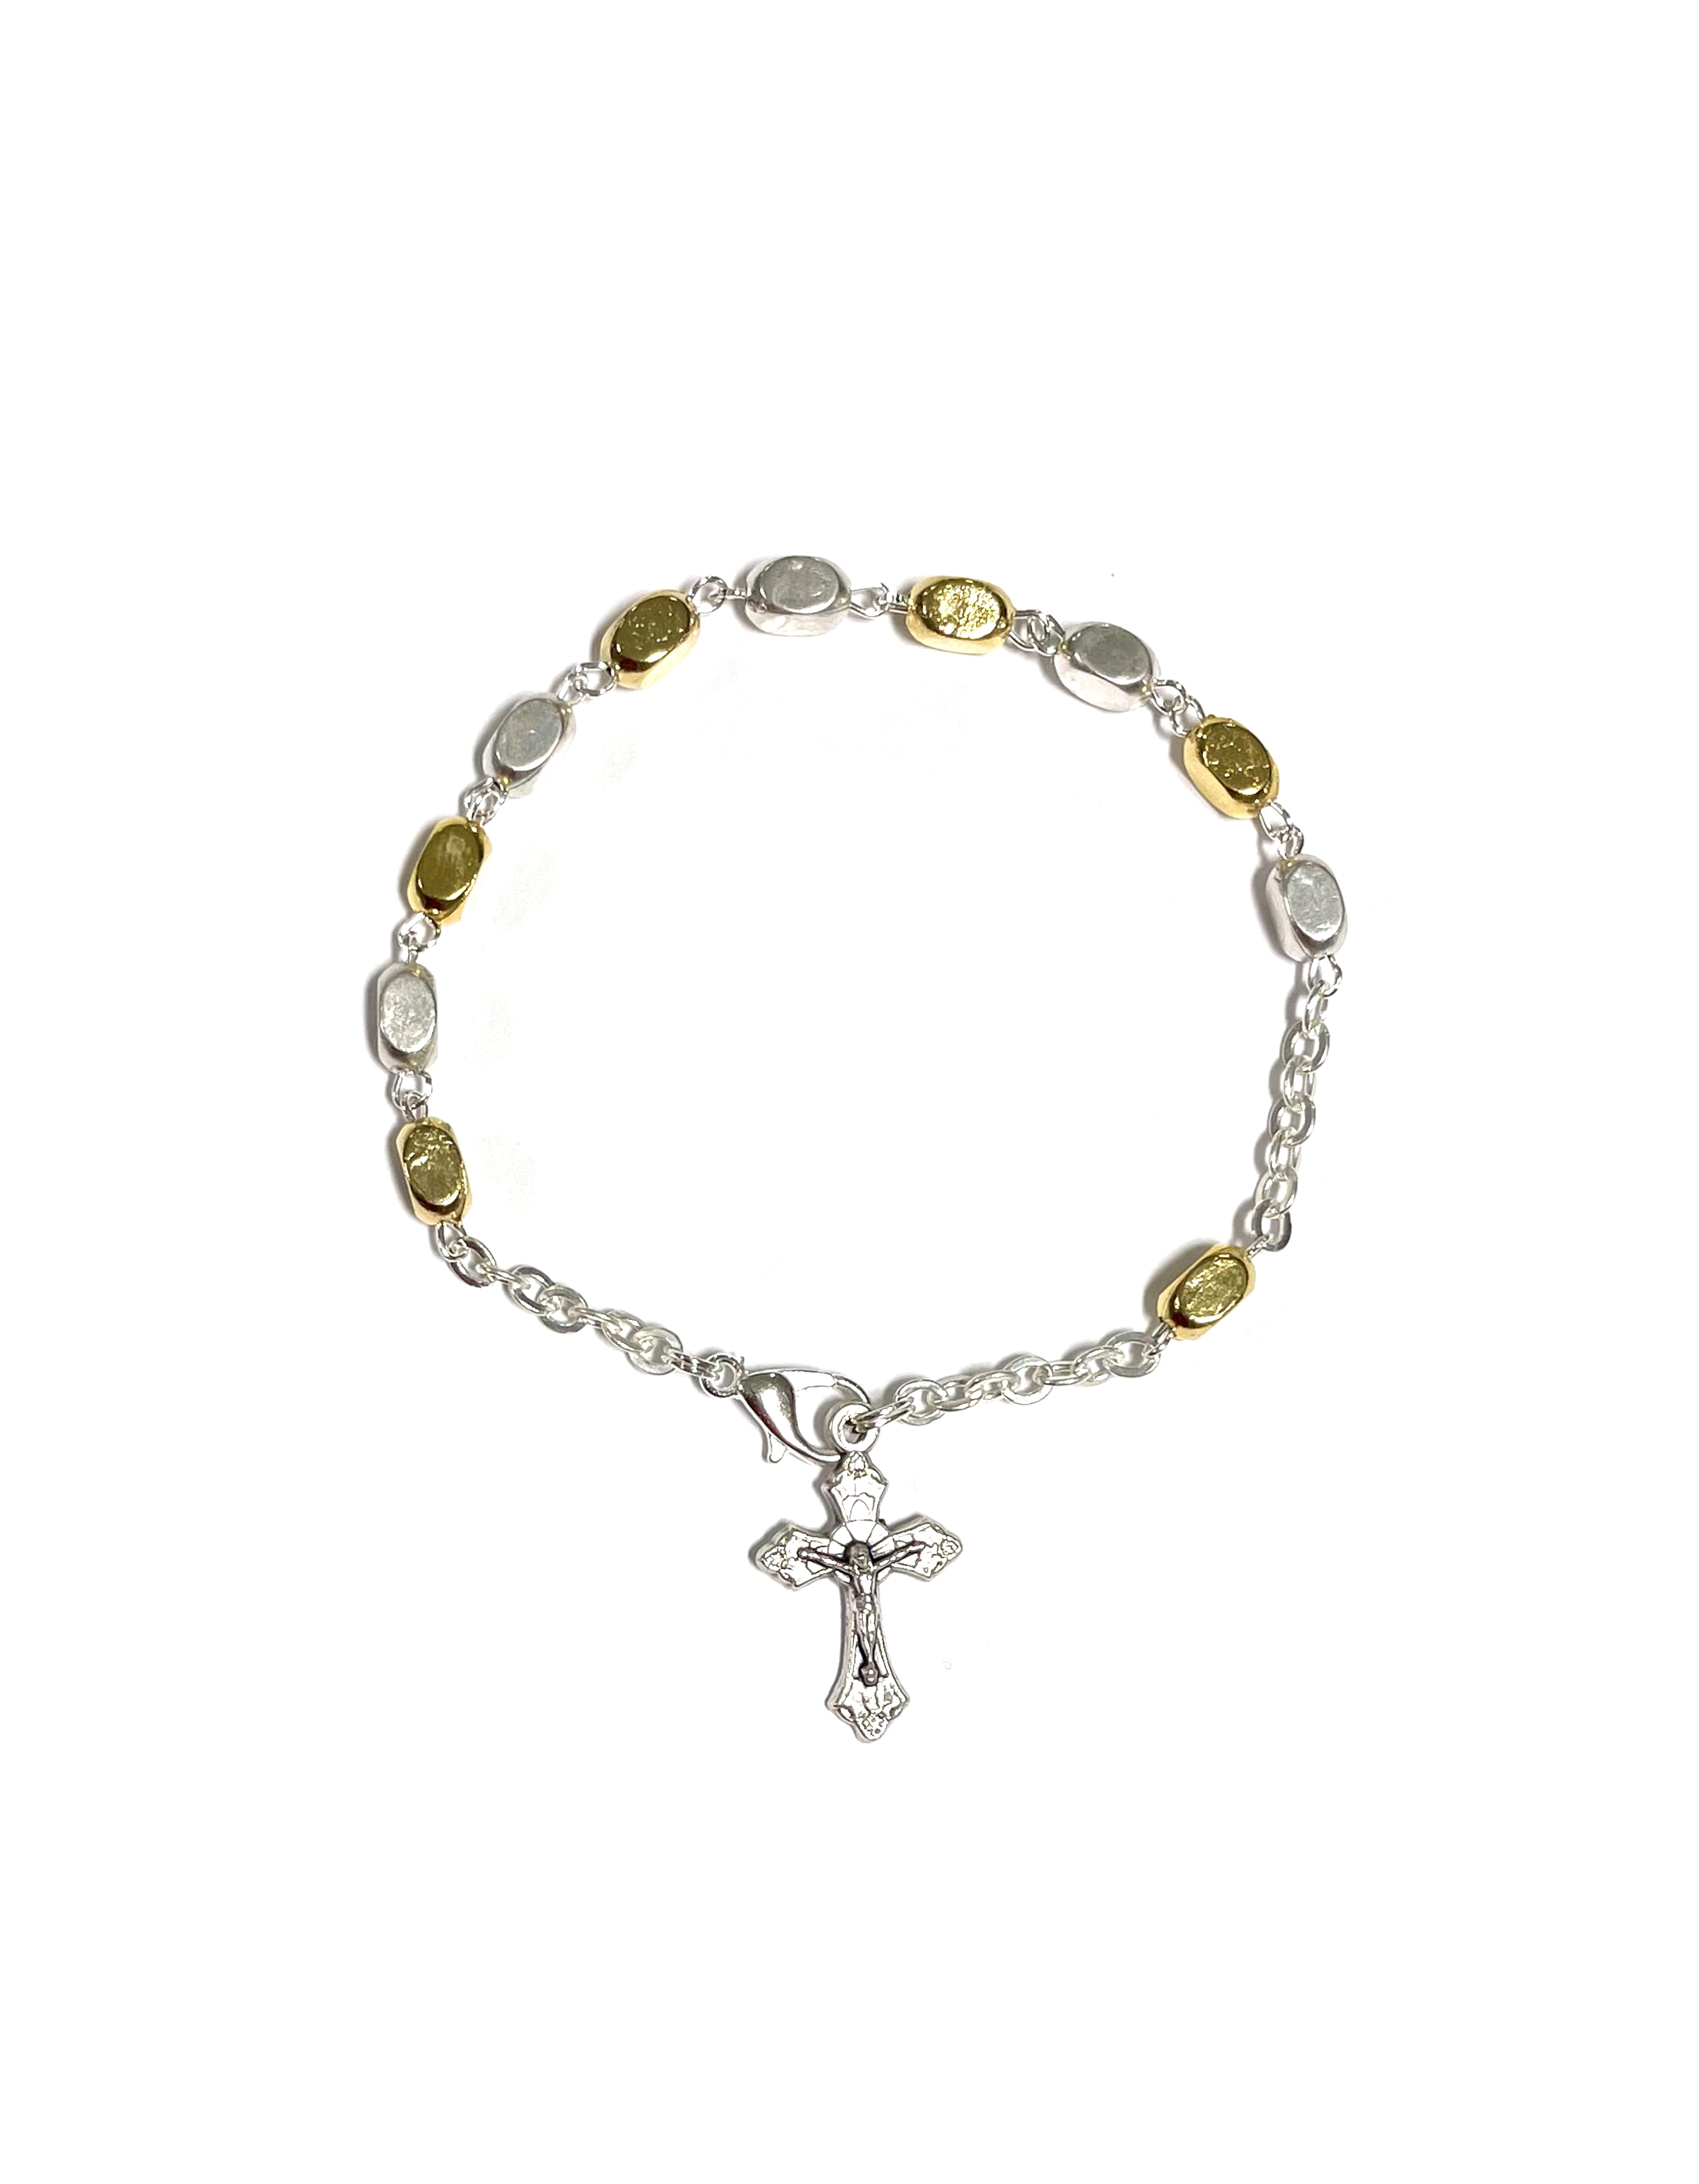 Oxidized silver and gold accents bracelet with small cross